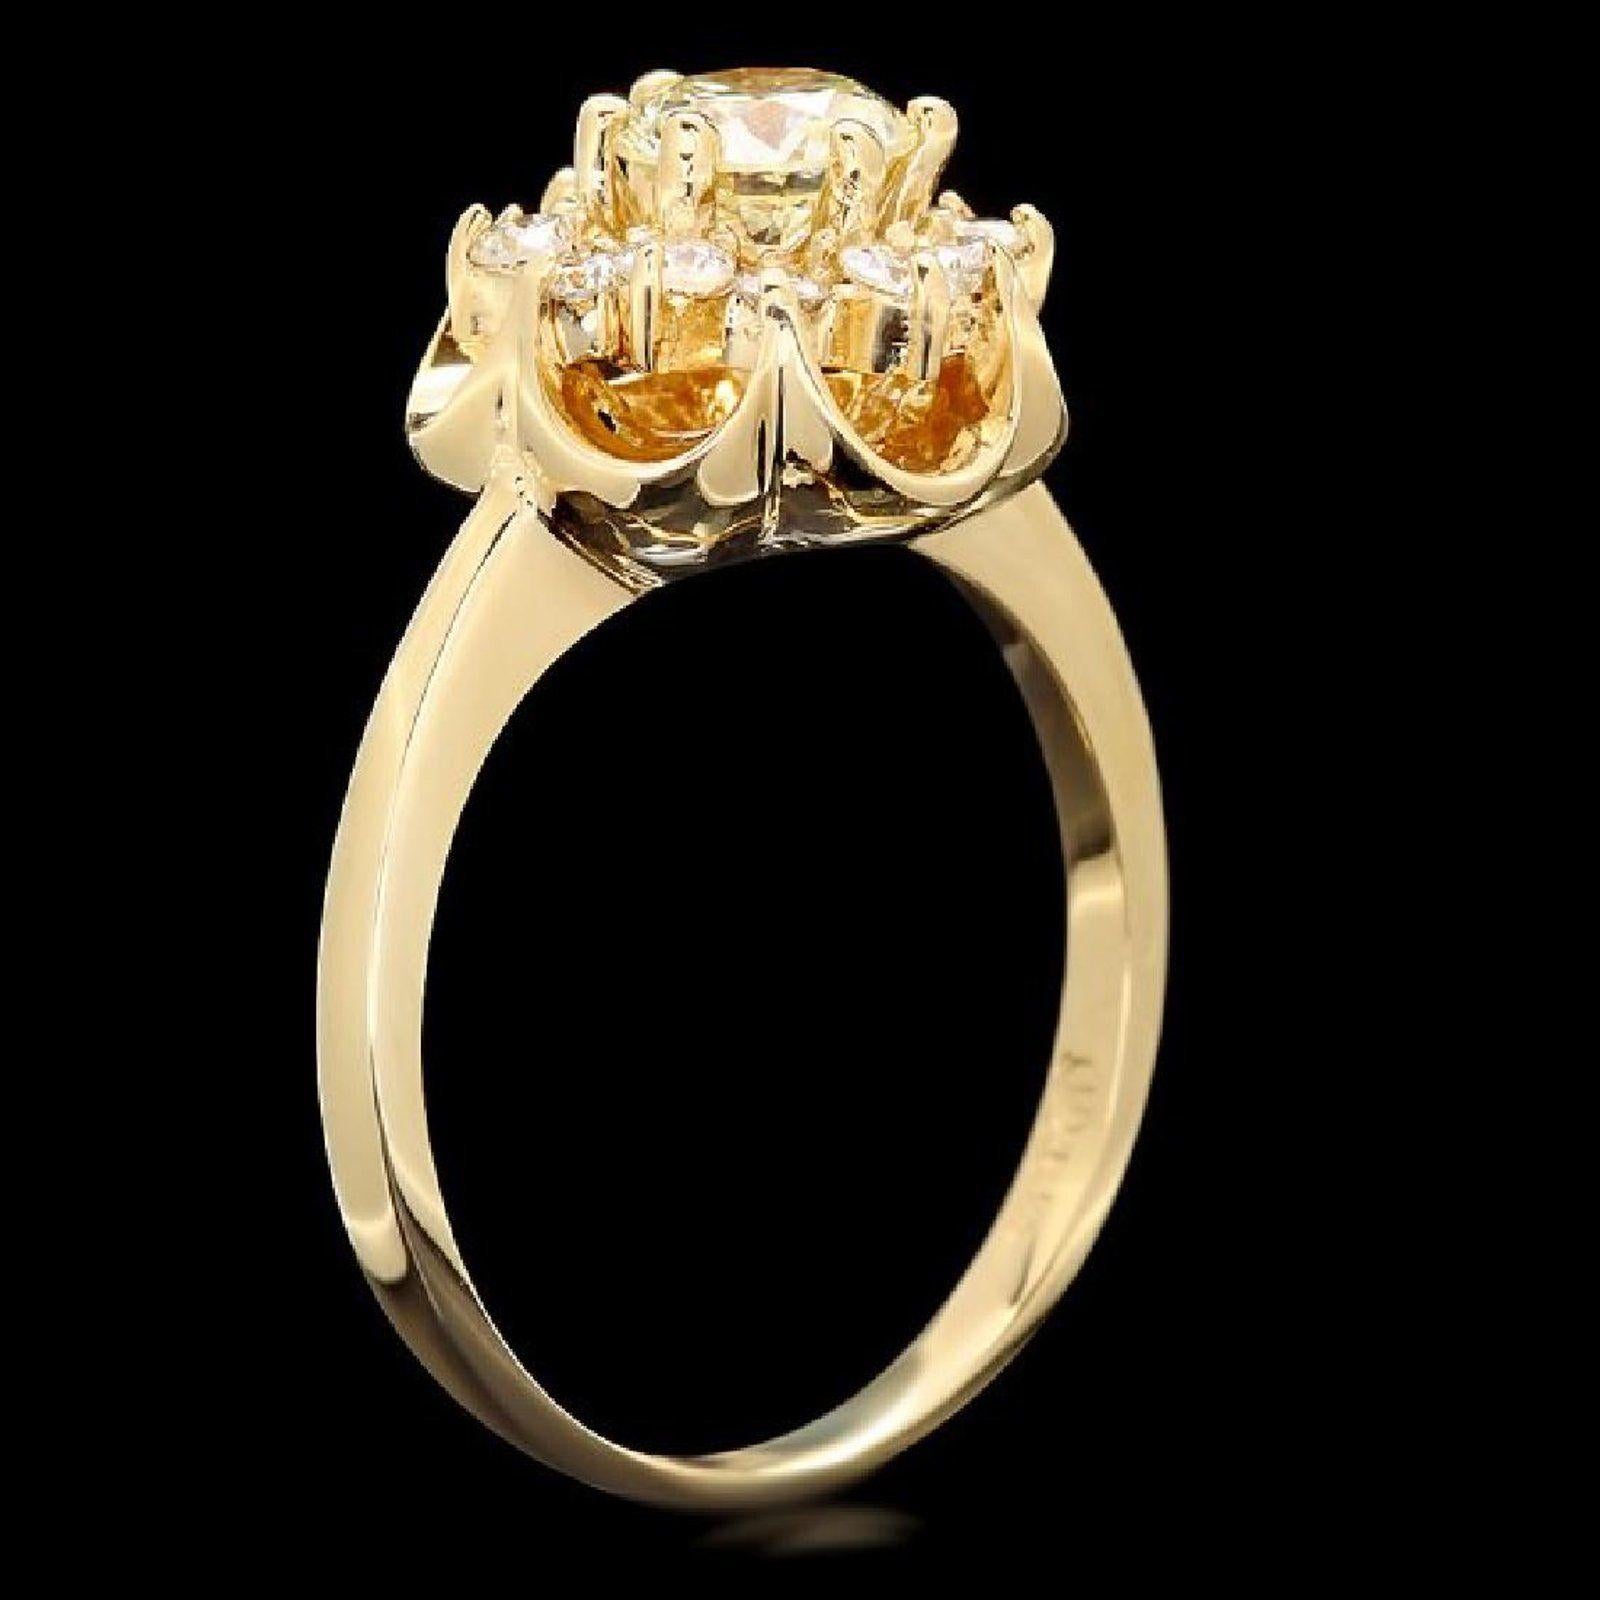 Splendid 1.15 Carats Natural Diamond 14K Solid Yellow Gold Ring

Stamped: 14K

Total Natural Round Cut Diamonds Weight: Approx. 1.15 Carats (color G-H / Clarity SI1-SI2)

Center Diamond Weight is: Approx. 0.70ct (SI1 / I )

Ring size: 7 (we offer